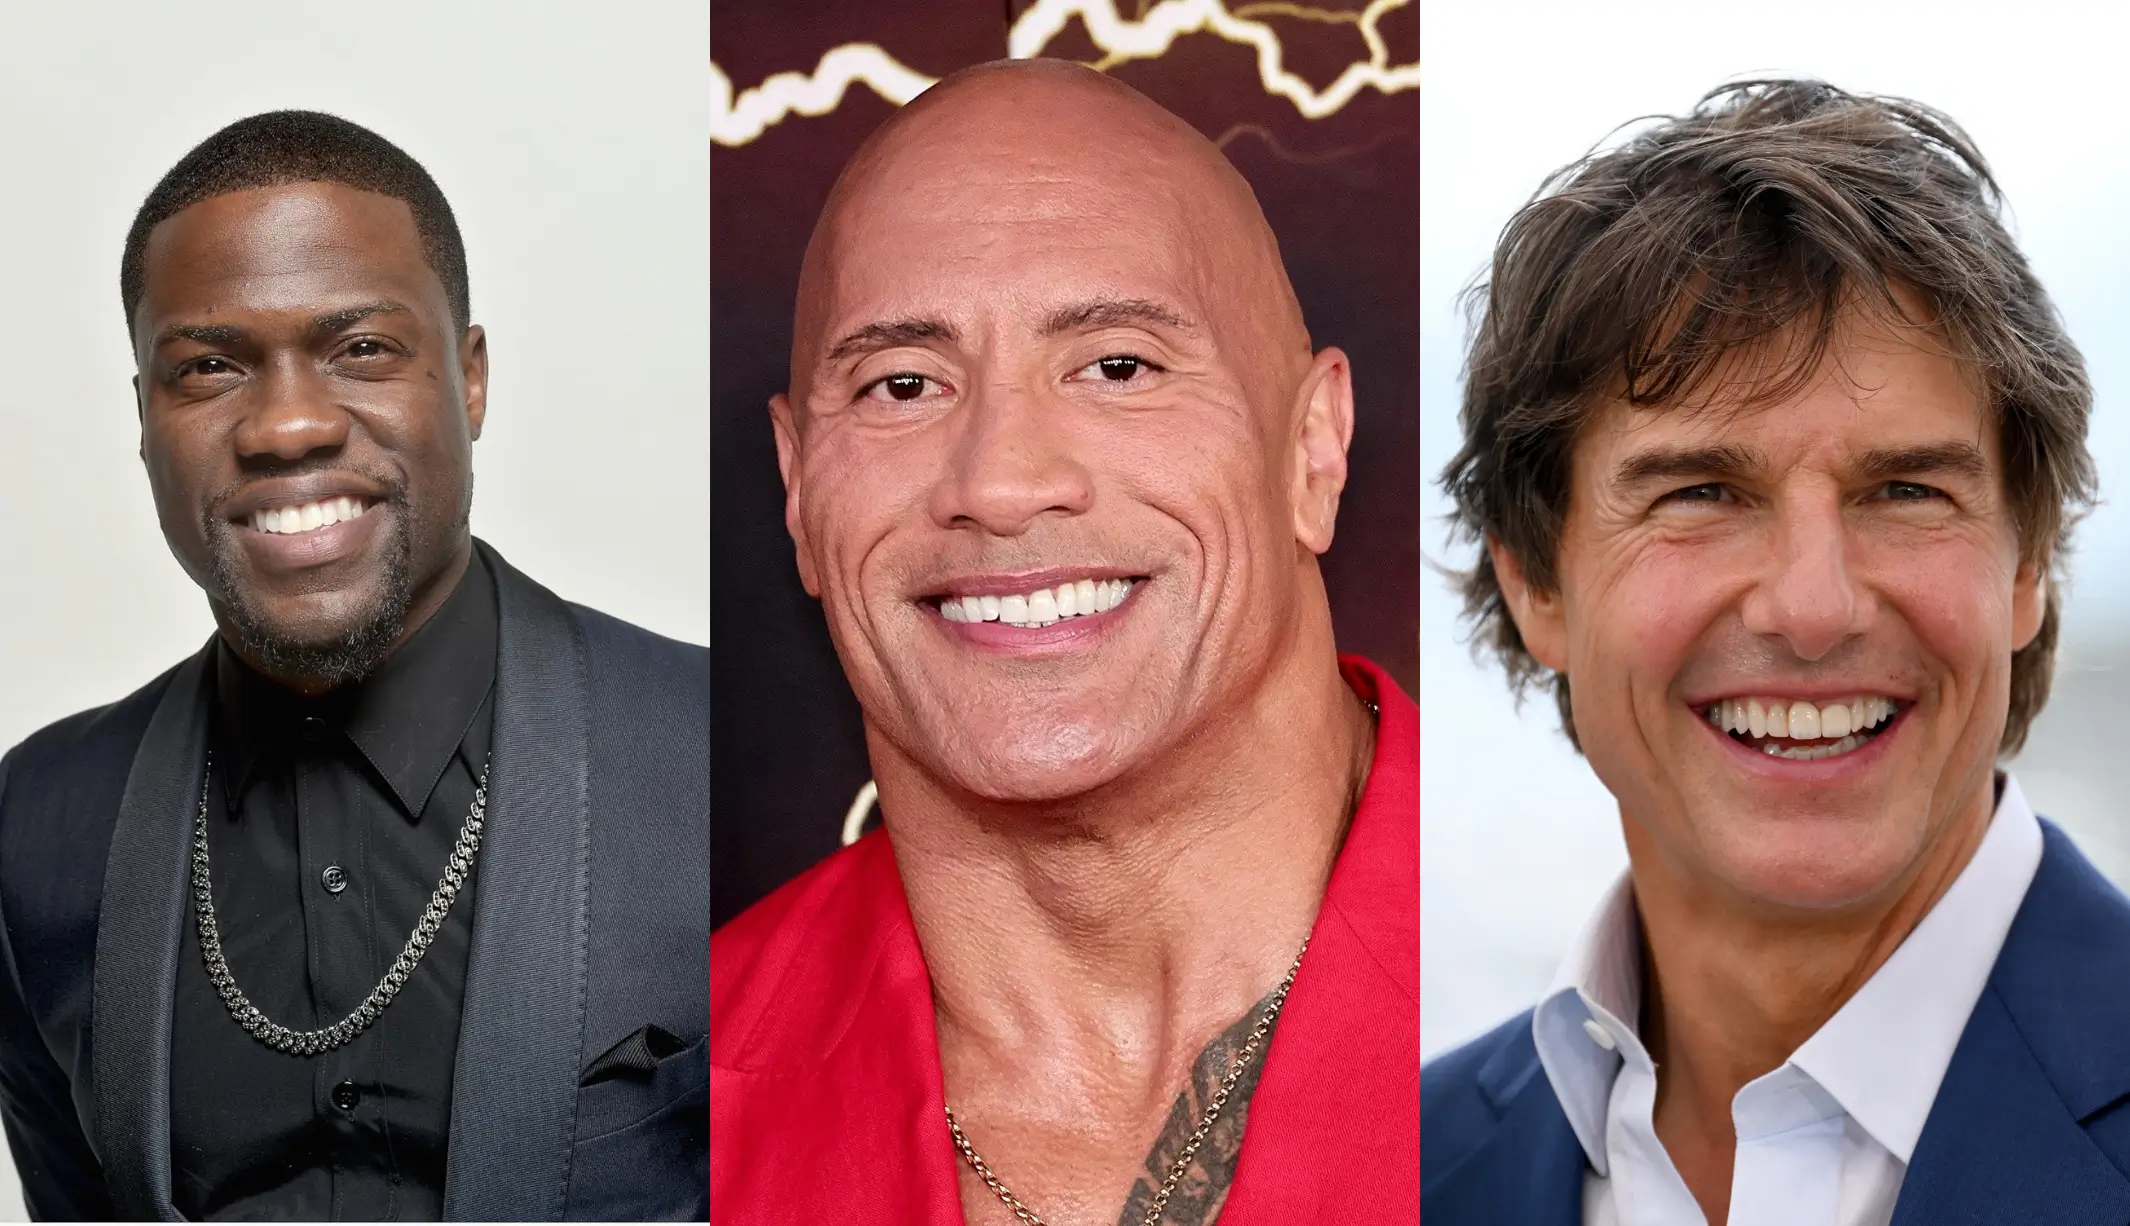 The Secret Action Movie Chat Group: Kevin Hart, Dwayne Johnson, and Tom Cruise